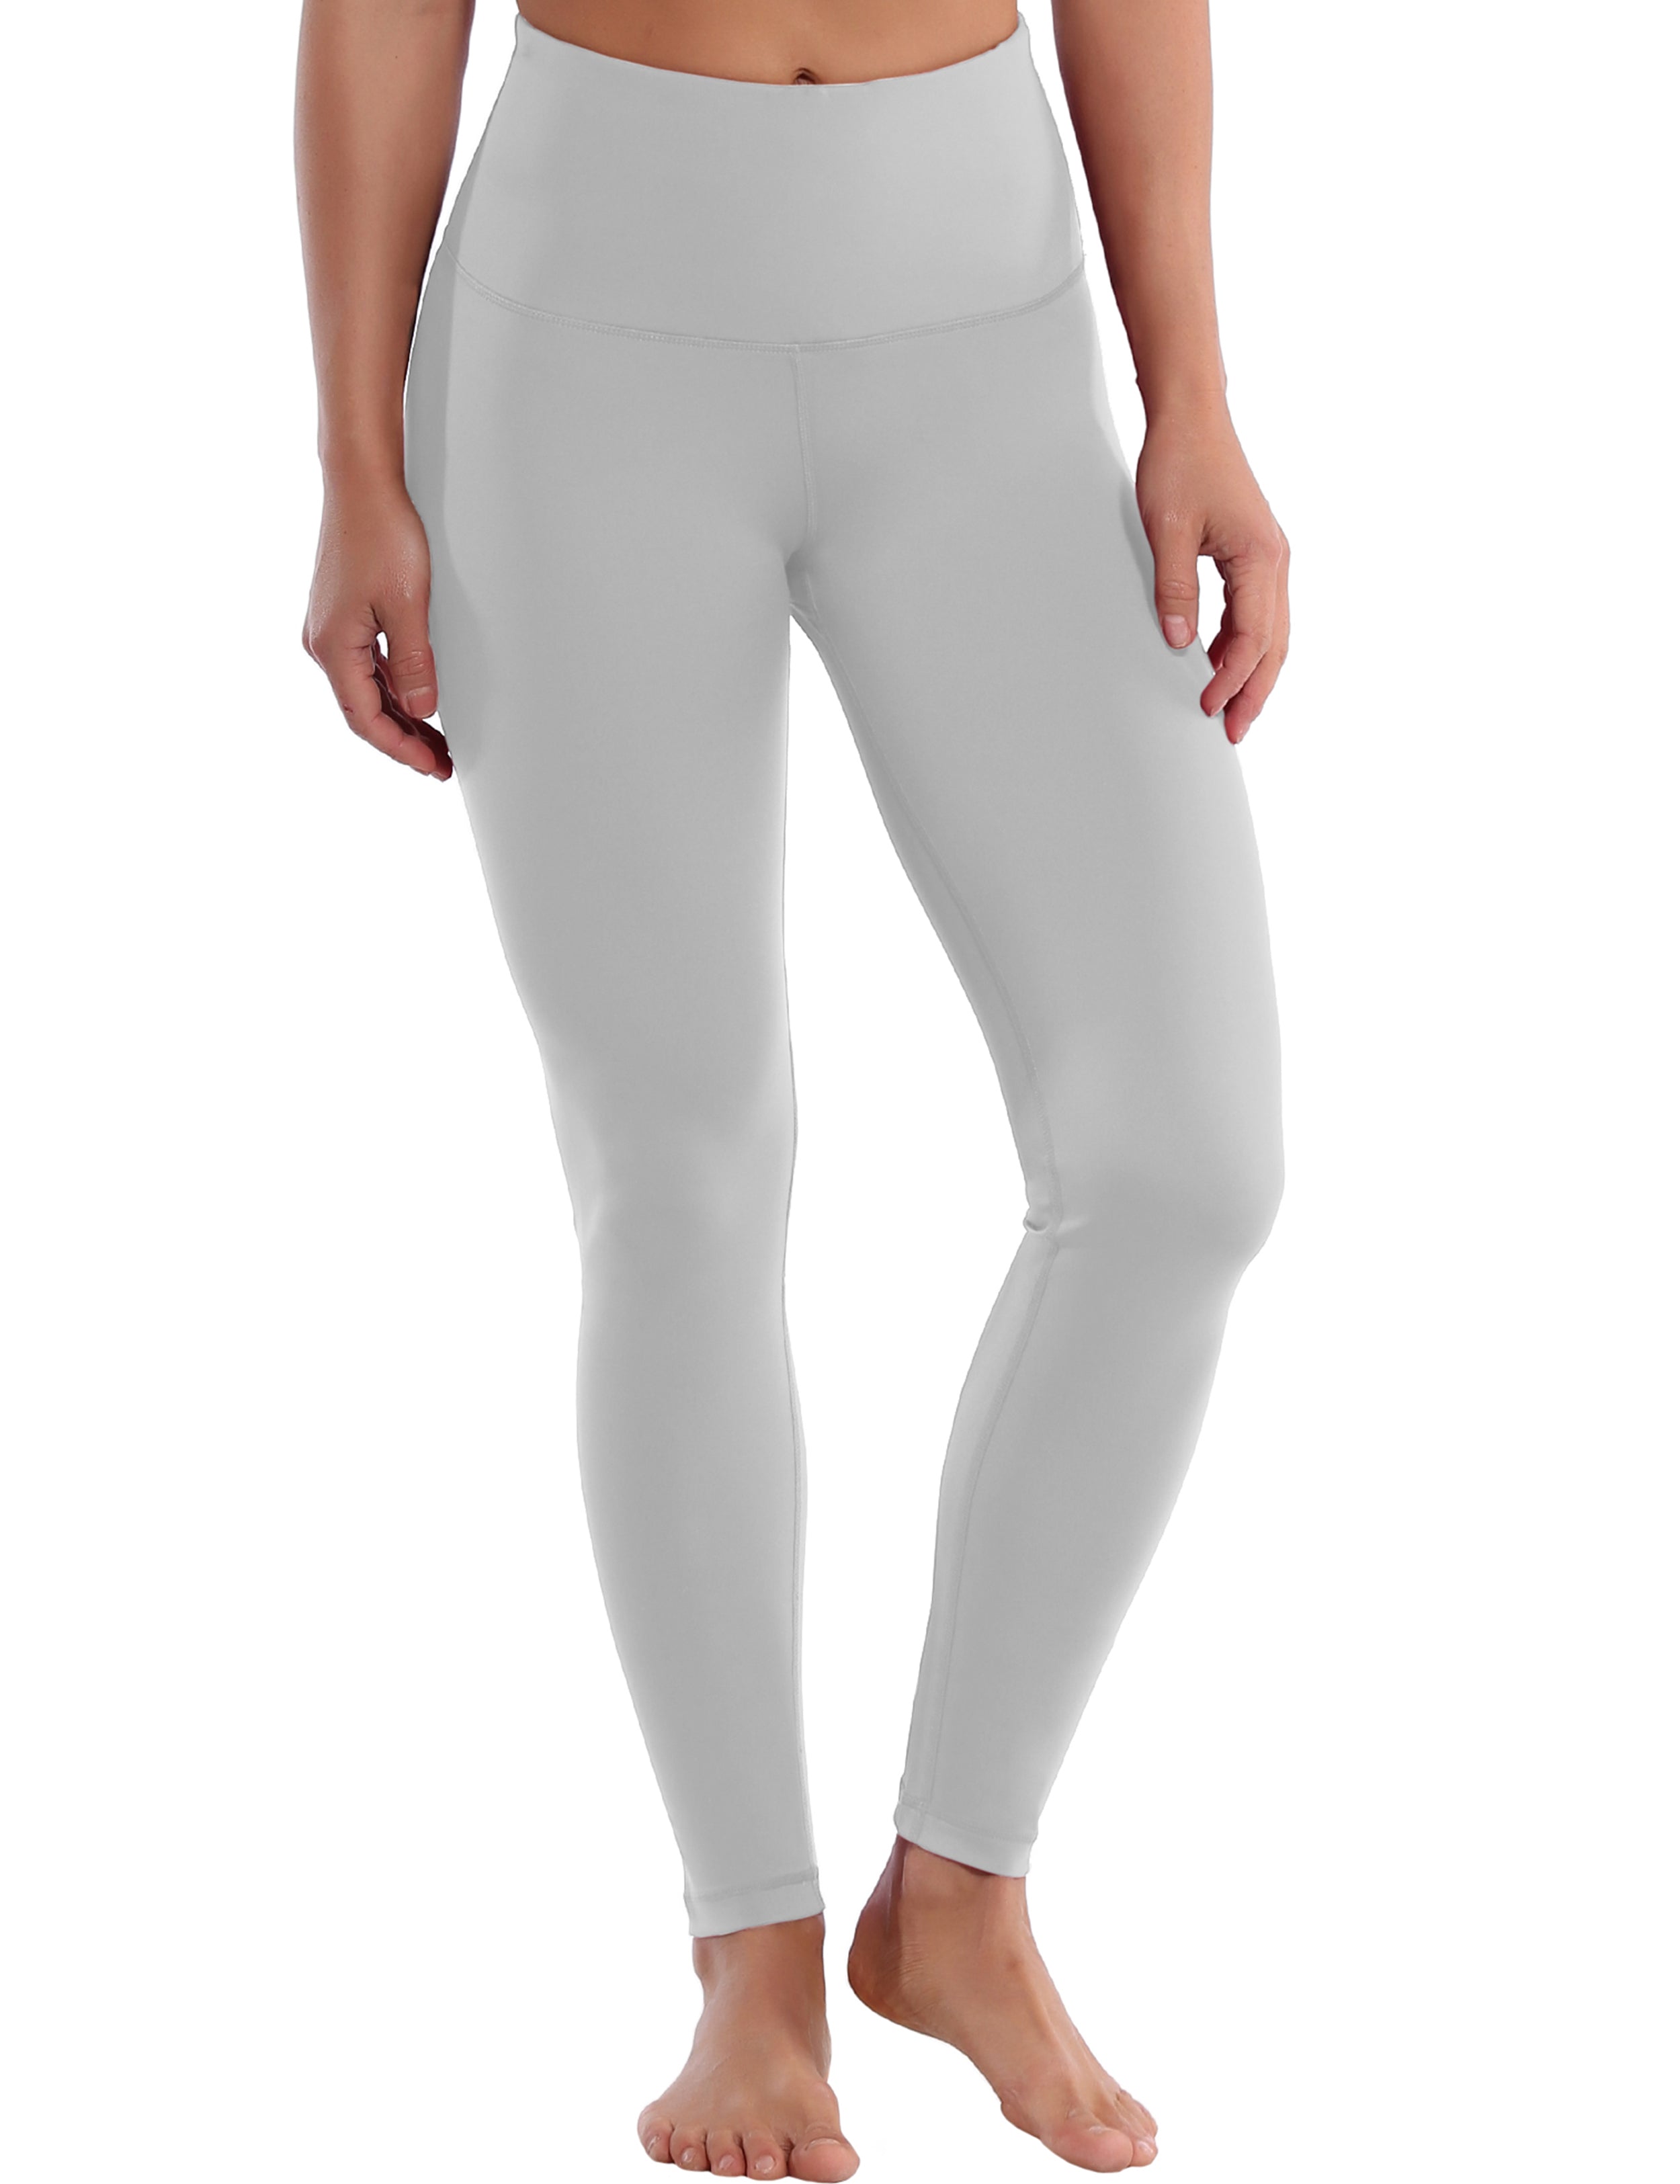 High Waist Biking Pants lightgray 75%Nylon/25%Spandex Fabric doesn't attract lint easily 4-way stretch No see-through Moisture-wicking Tummy control Inner pocket Four lengths